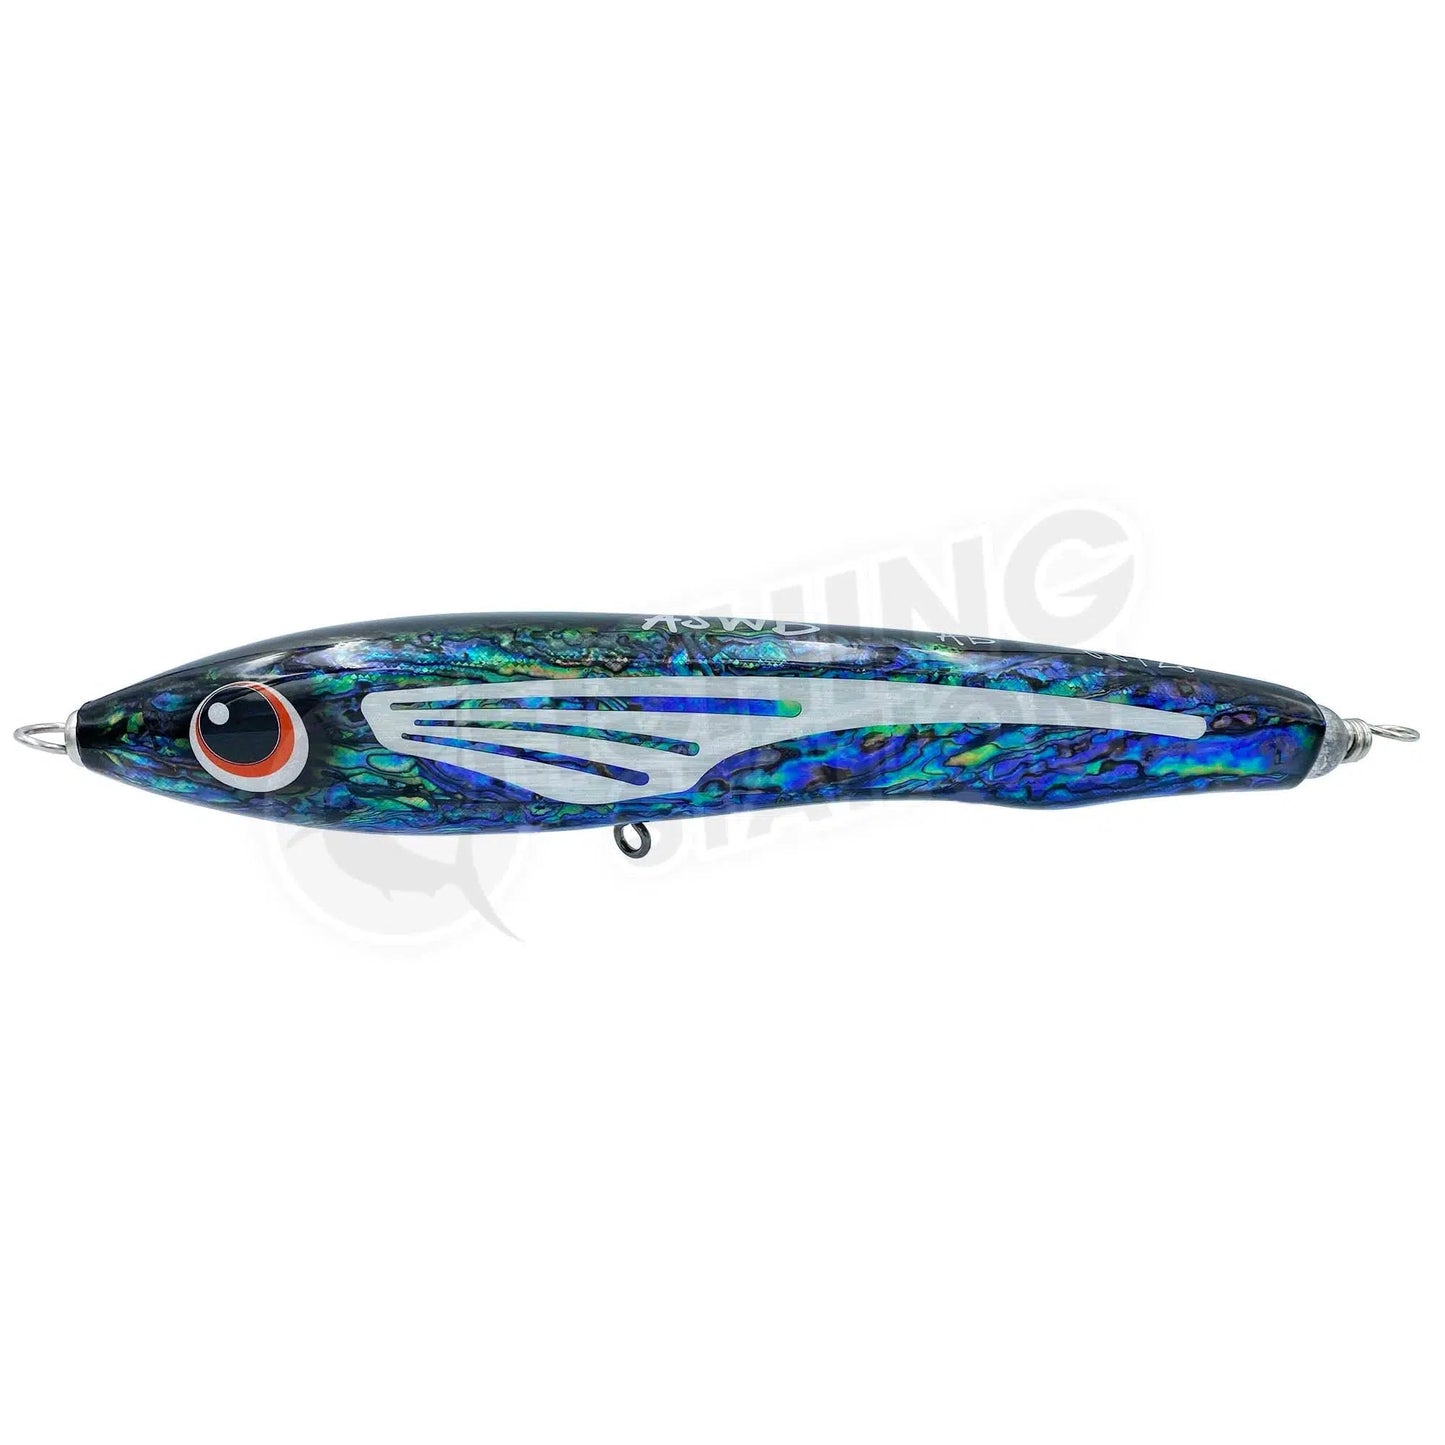 ASWB SS120 Sinking Stickbait-Lure - Poppers, Stickbaits & Pencils-ASWB-Mixed Abalone-Fishing Station